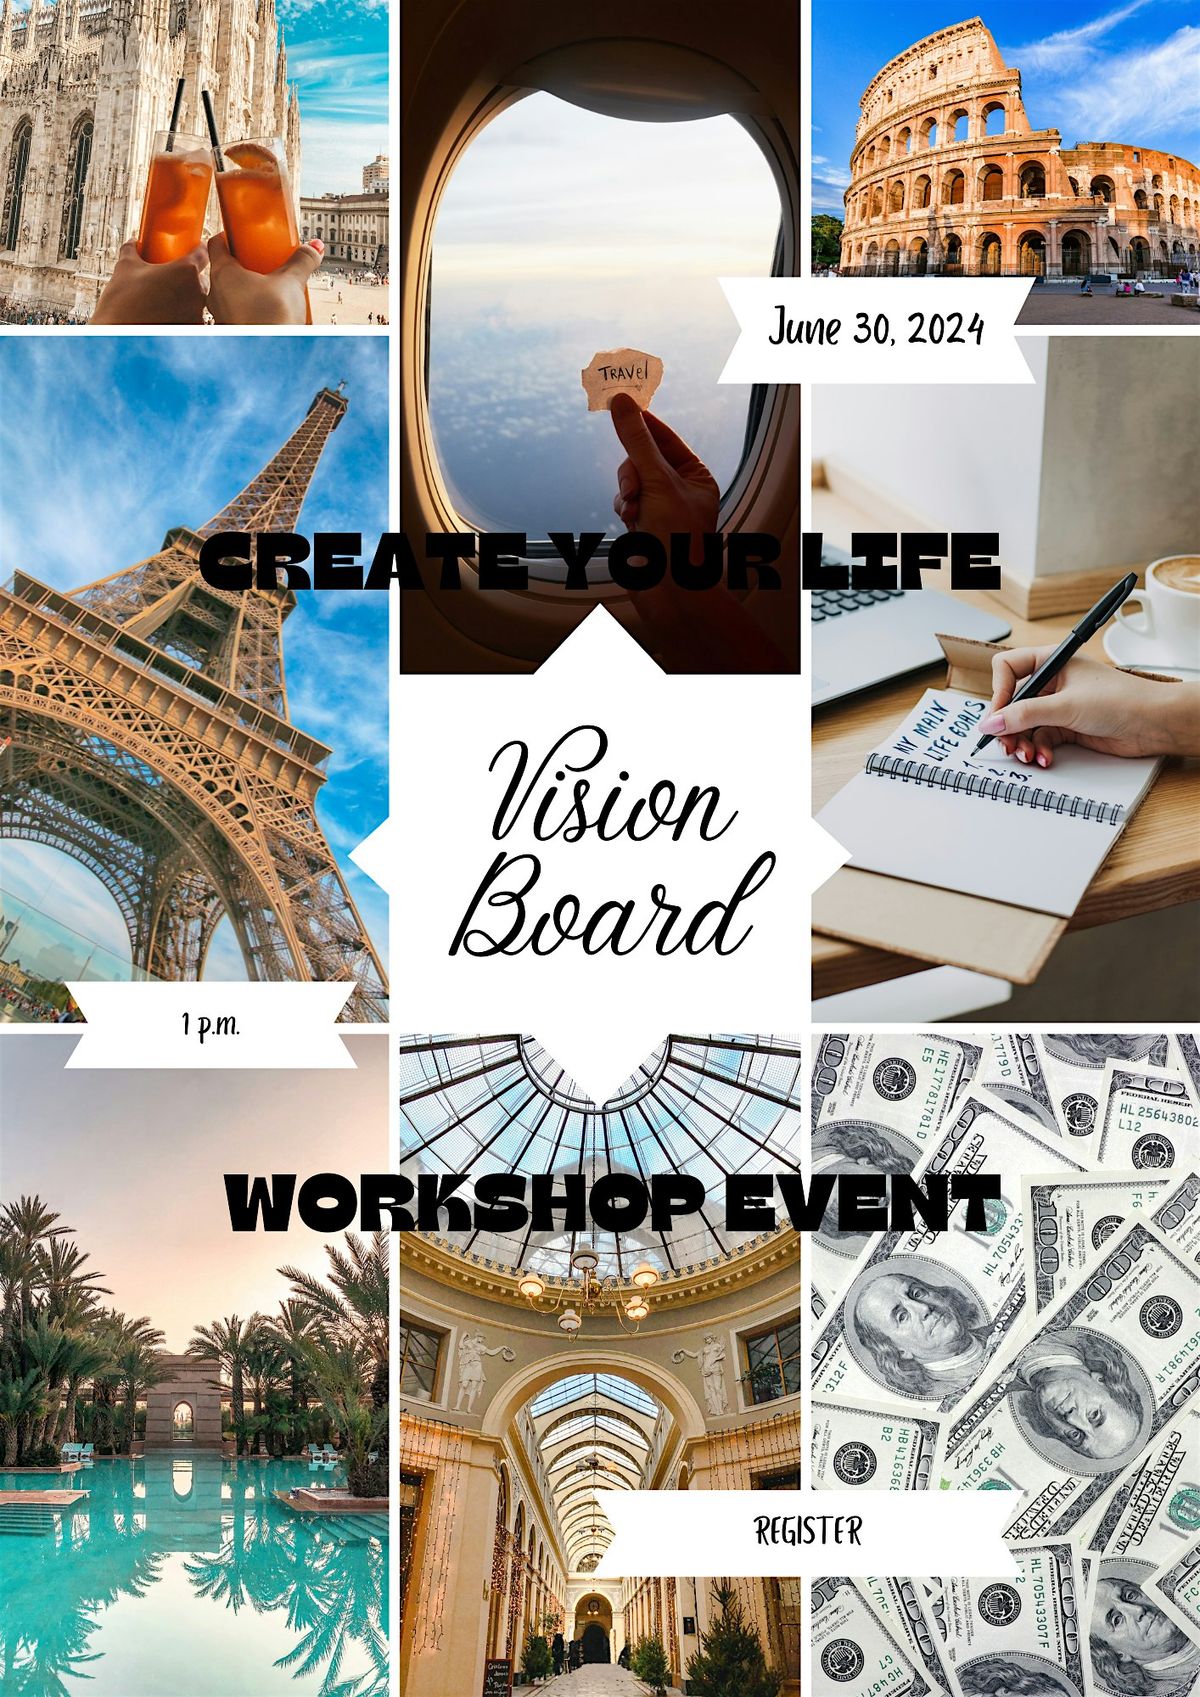 CREATE YOUR LIFE VISION-BOARD WORKSHOP WOMEN'S EVENT